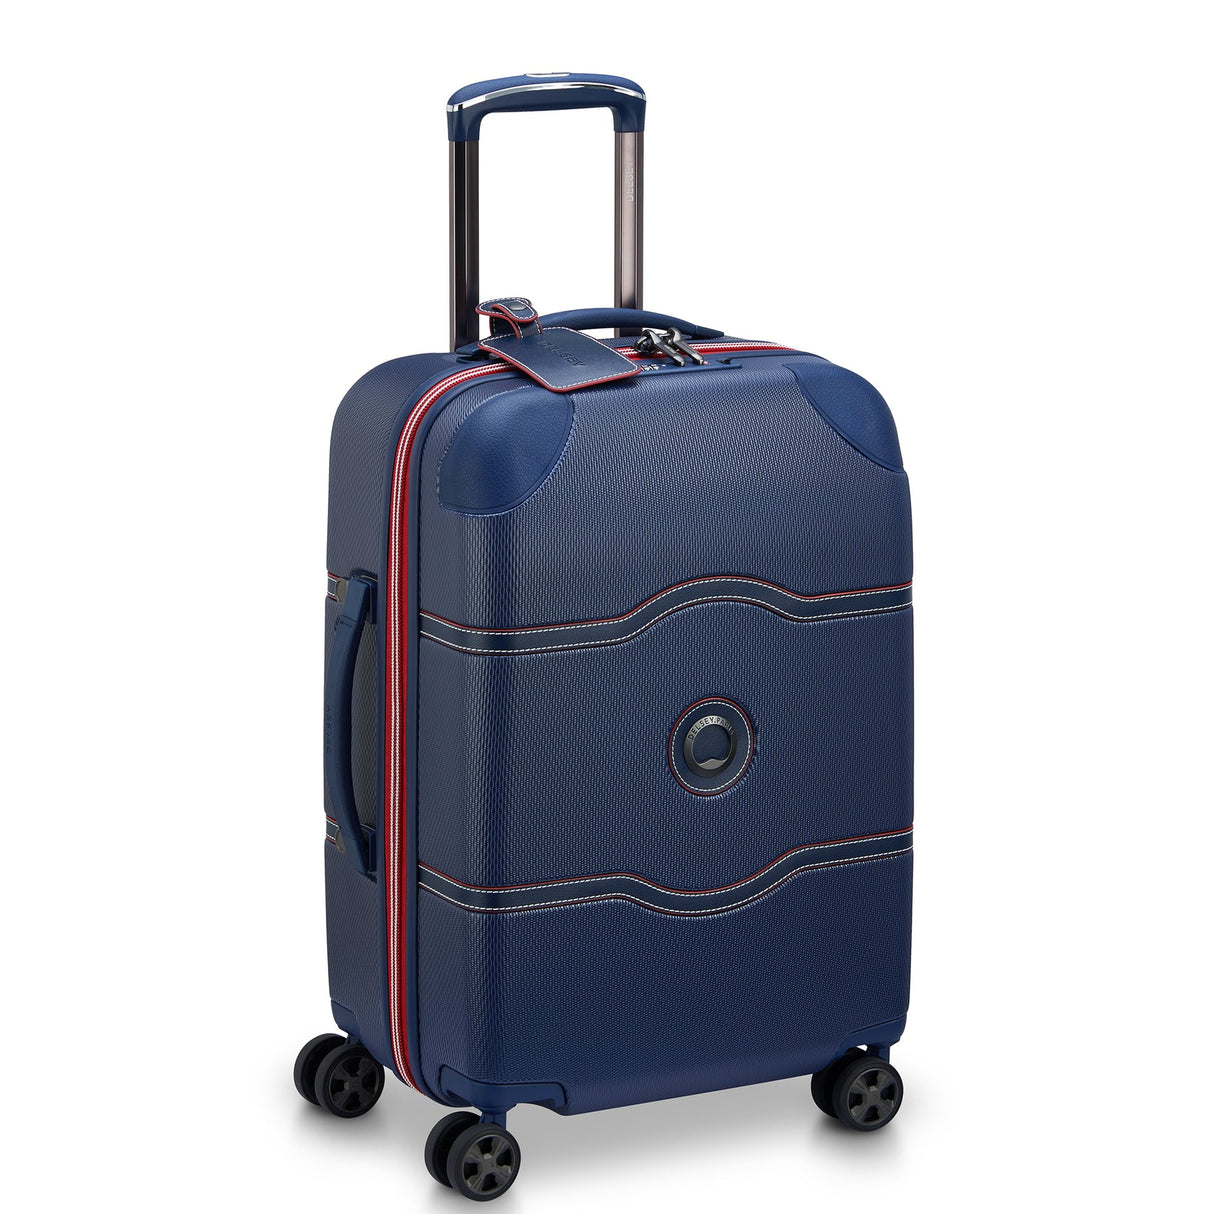 Delsey Chatelet Air 2.0 Carry-On Spinner , , delsey-chatelet-air-2.0-40167680502-02_1800x1800_7d6a8878-28d9-41e3-b880-4df95114ee71